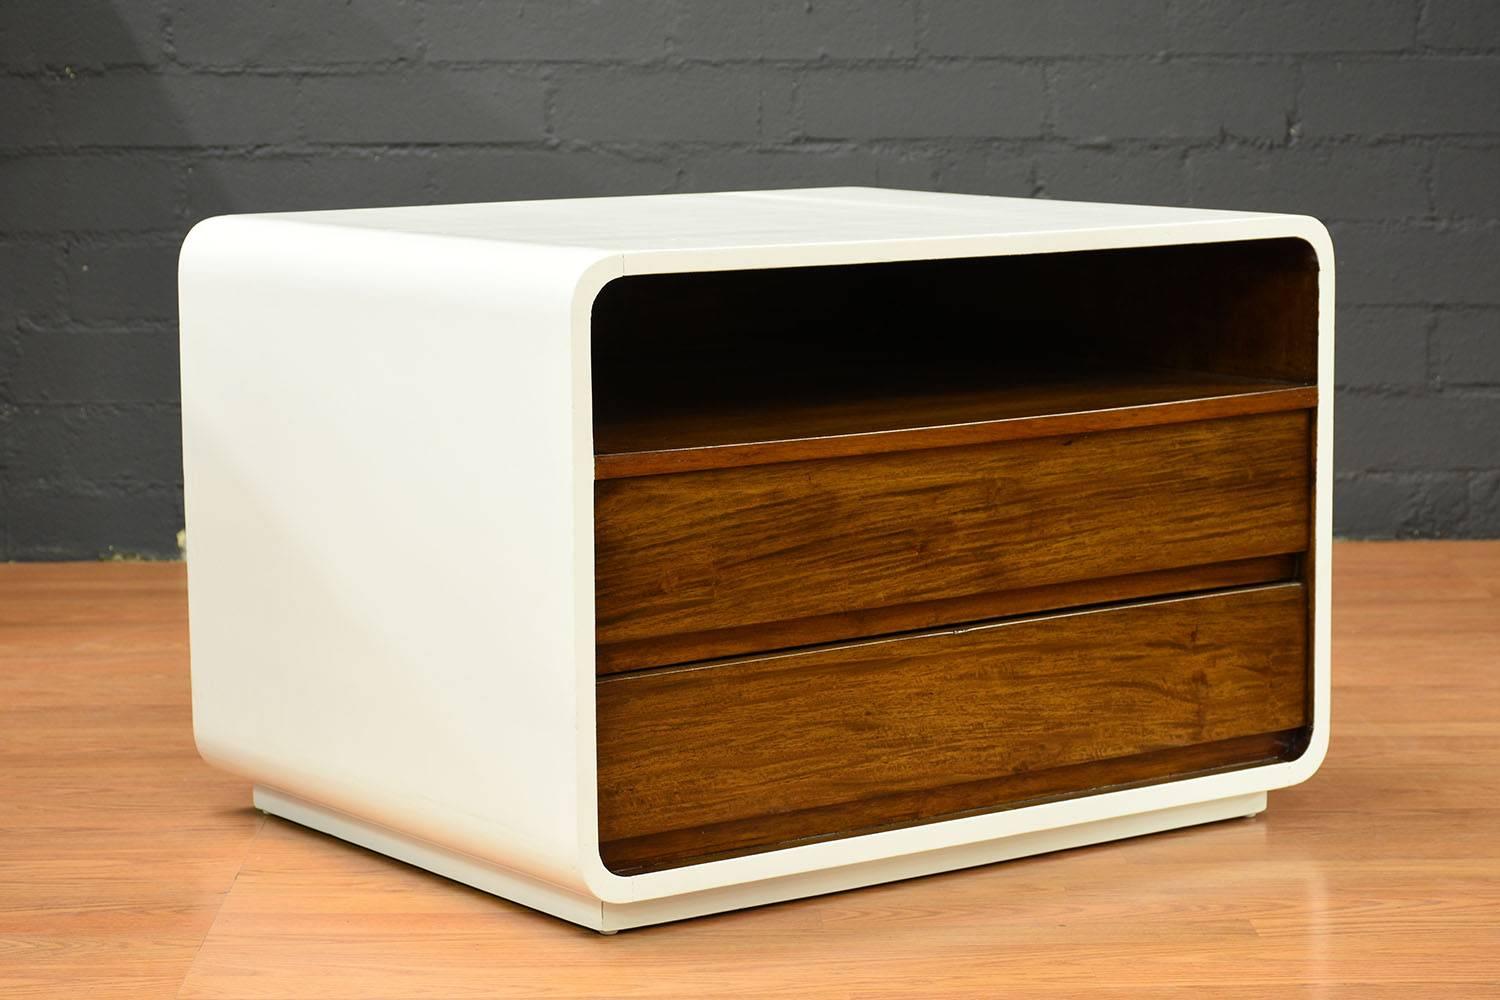 This pair of 1960s Mid-Century Modern-style nightstands is made of walnut wood finished in a two-tone color combination of white and a rich walnut color stain. The outside of the nightstands is painted a clean white color and features rounded